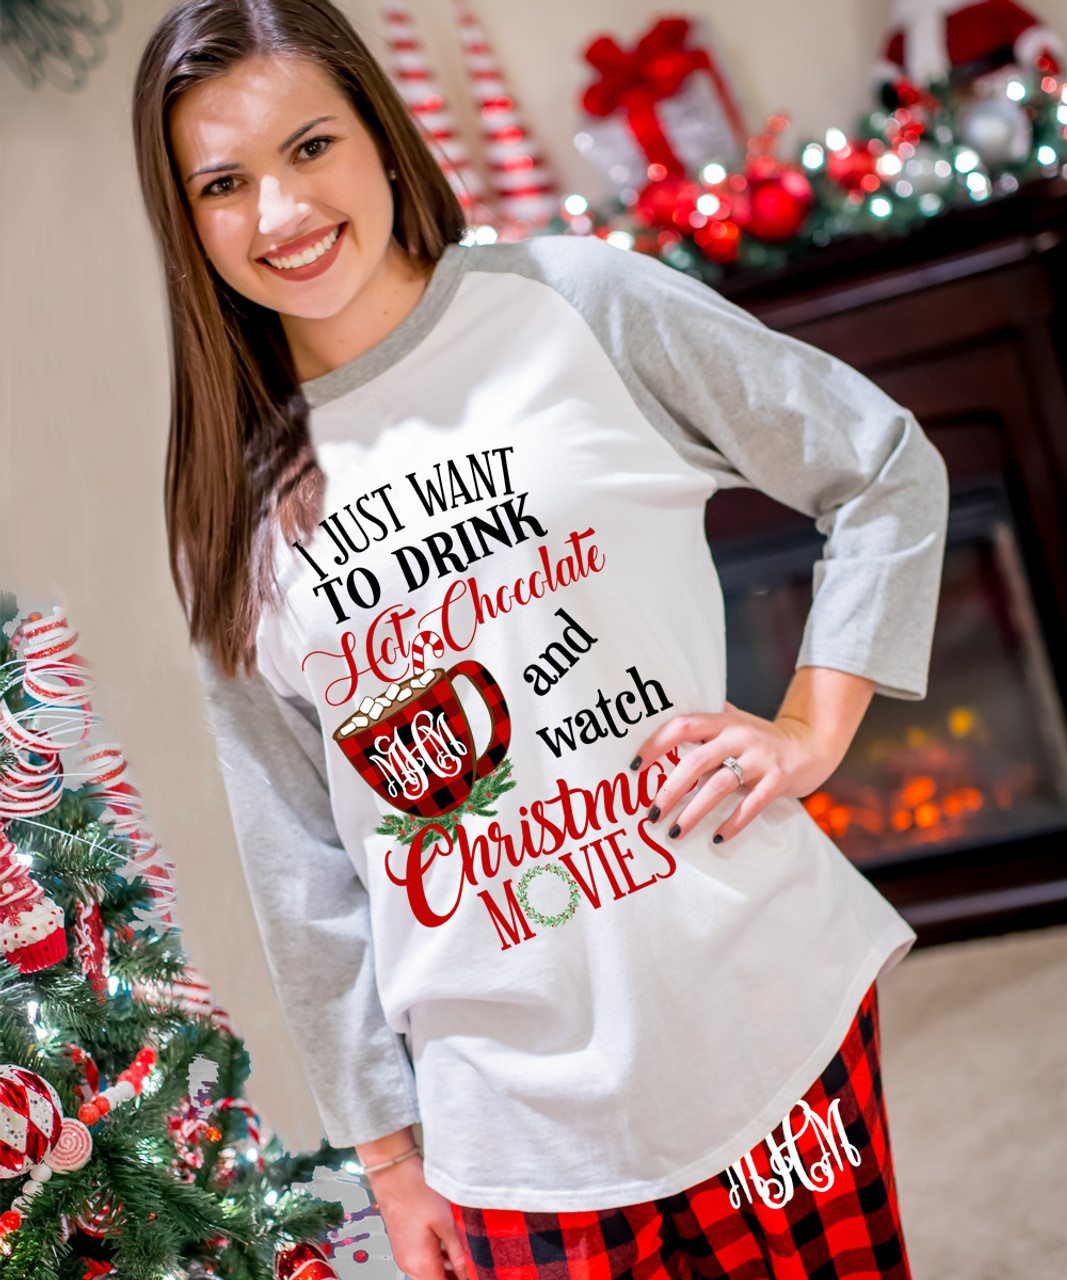 https://cdn11.bigcommerce.com/s-rrje11zjnk/images/stencil/1280x1280/products/3805/46478/monogrammed-i-just-want-to-drink-hot-chocolate-and-watch-christmas-movies-graphic-raglan-tee-heather-grey__50866.1651697521.jpg?c=1